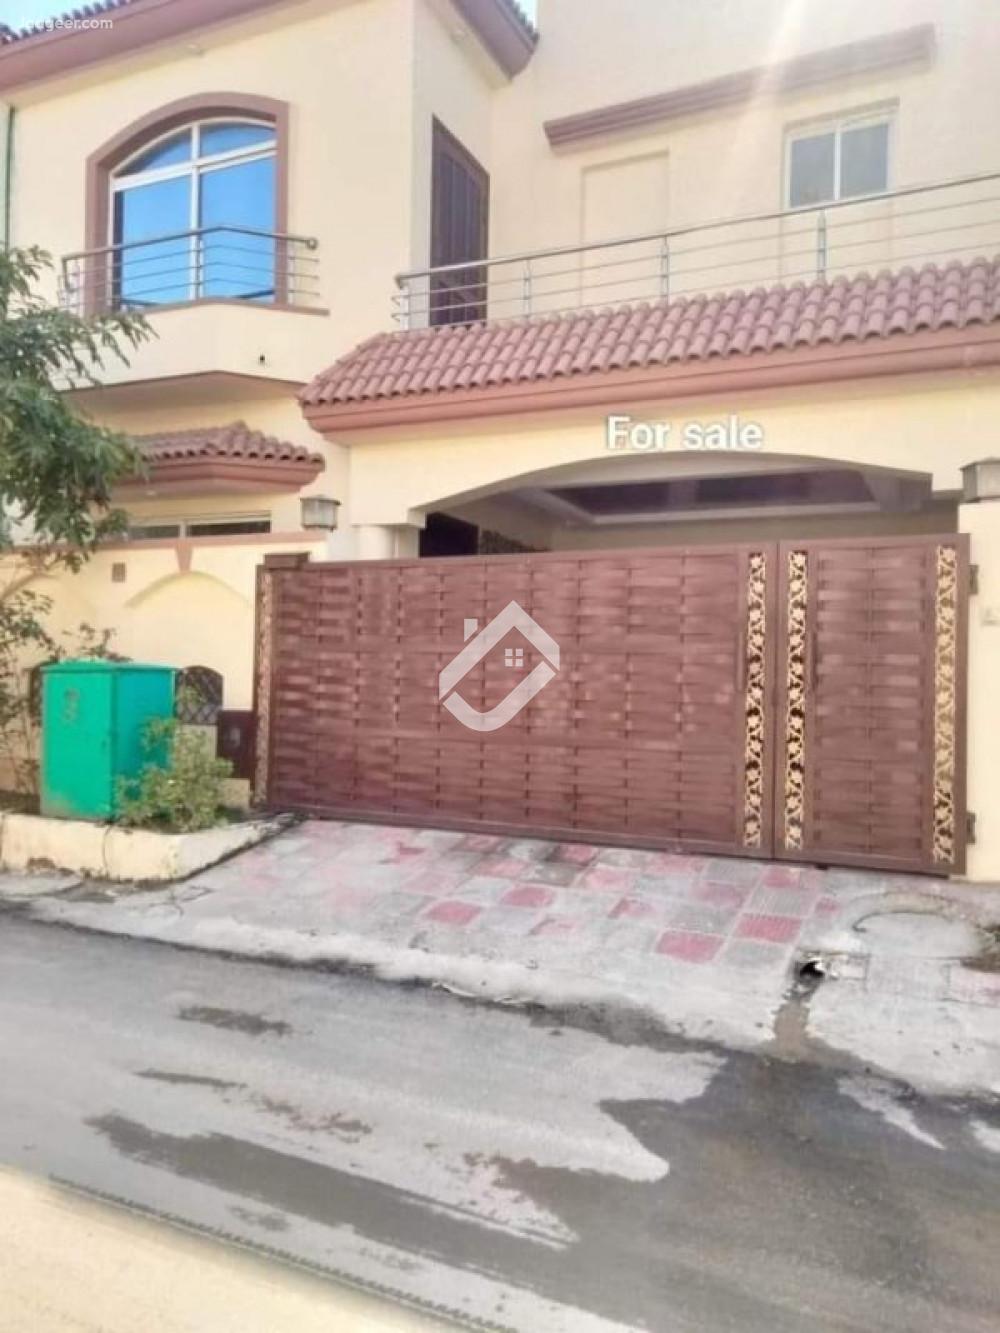 Main image 7 Marla Double Storey House For Sale In Bahria Town Phase-8 Usman Block Bahria Town Phase-8, Rawalpindi